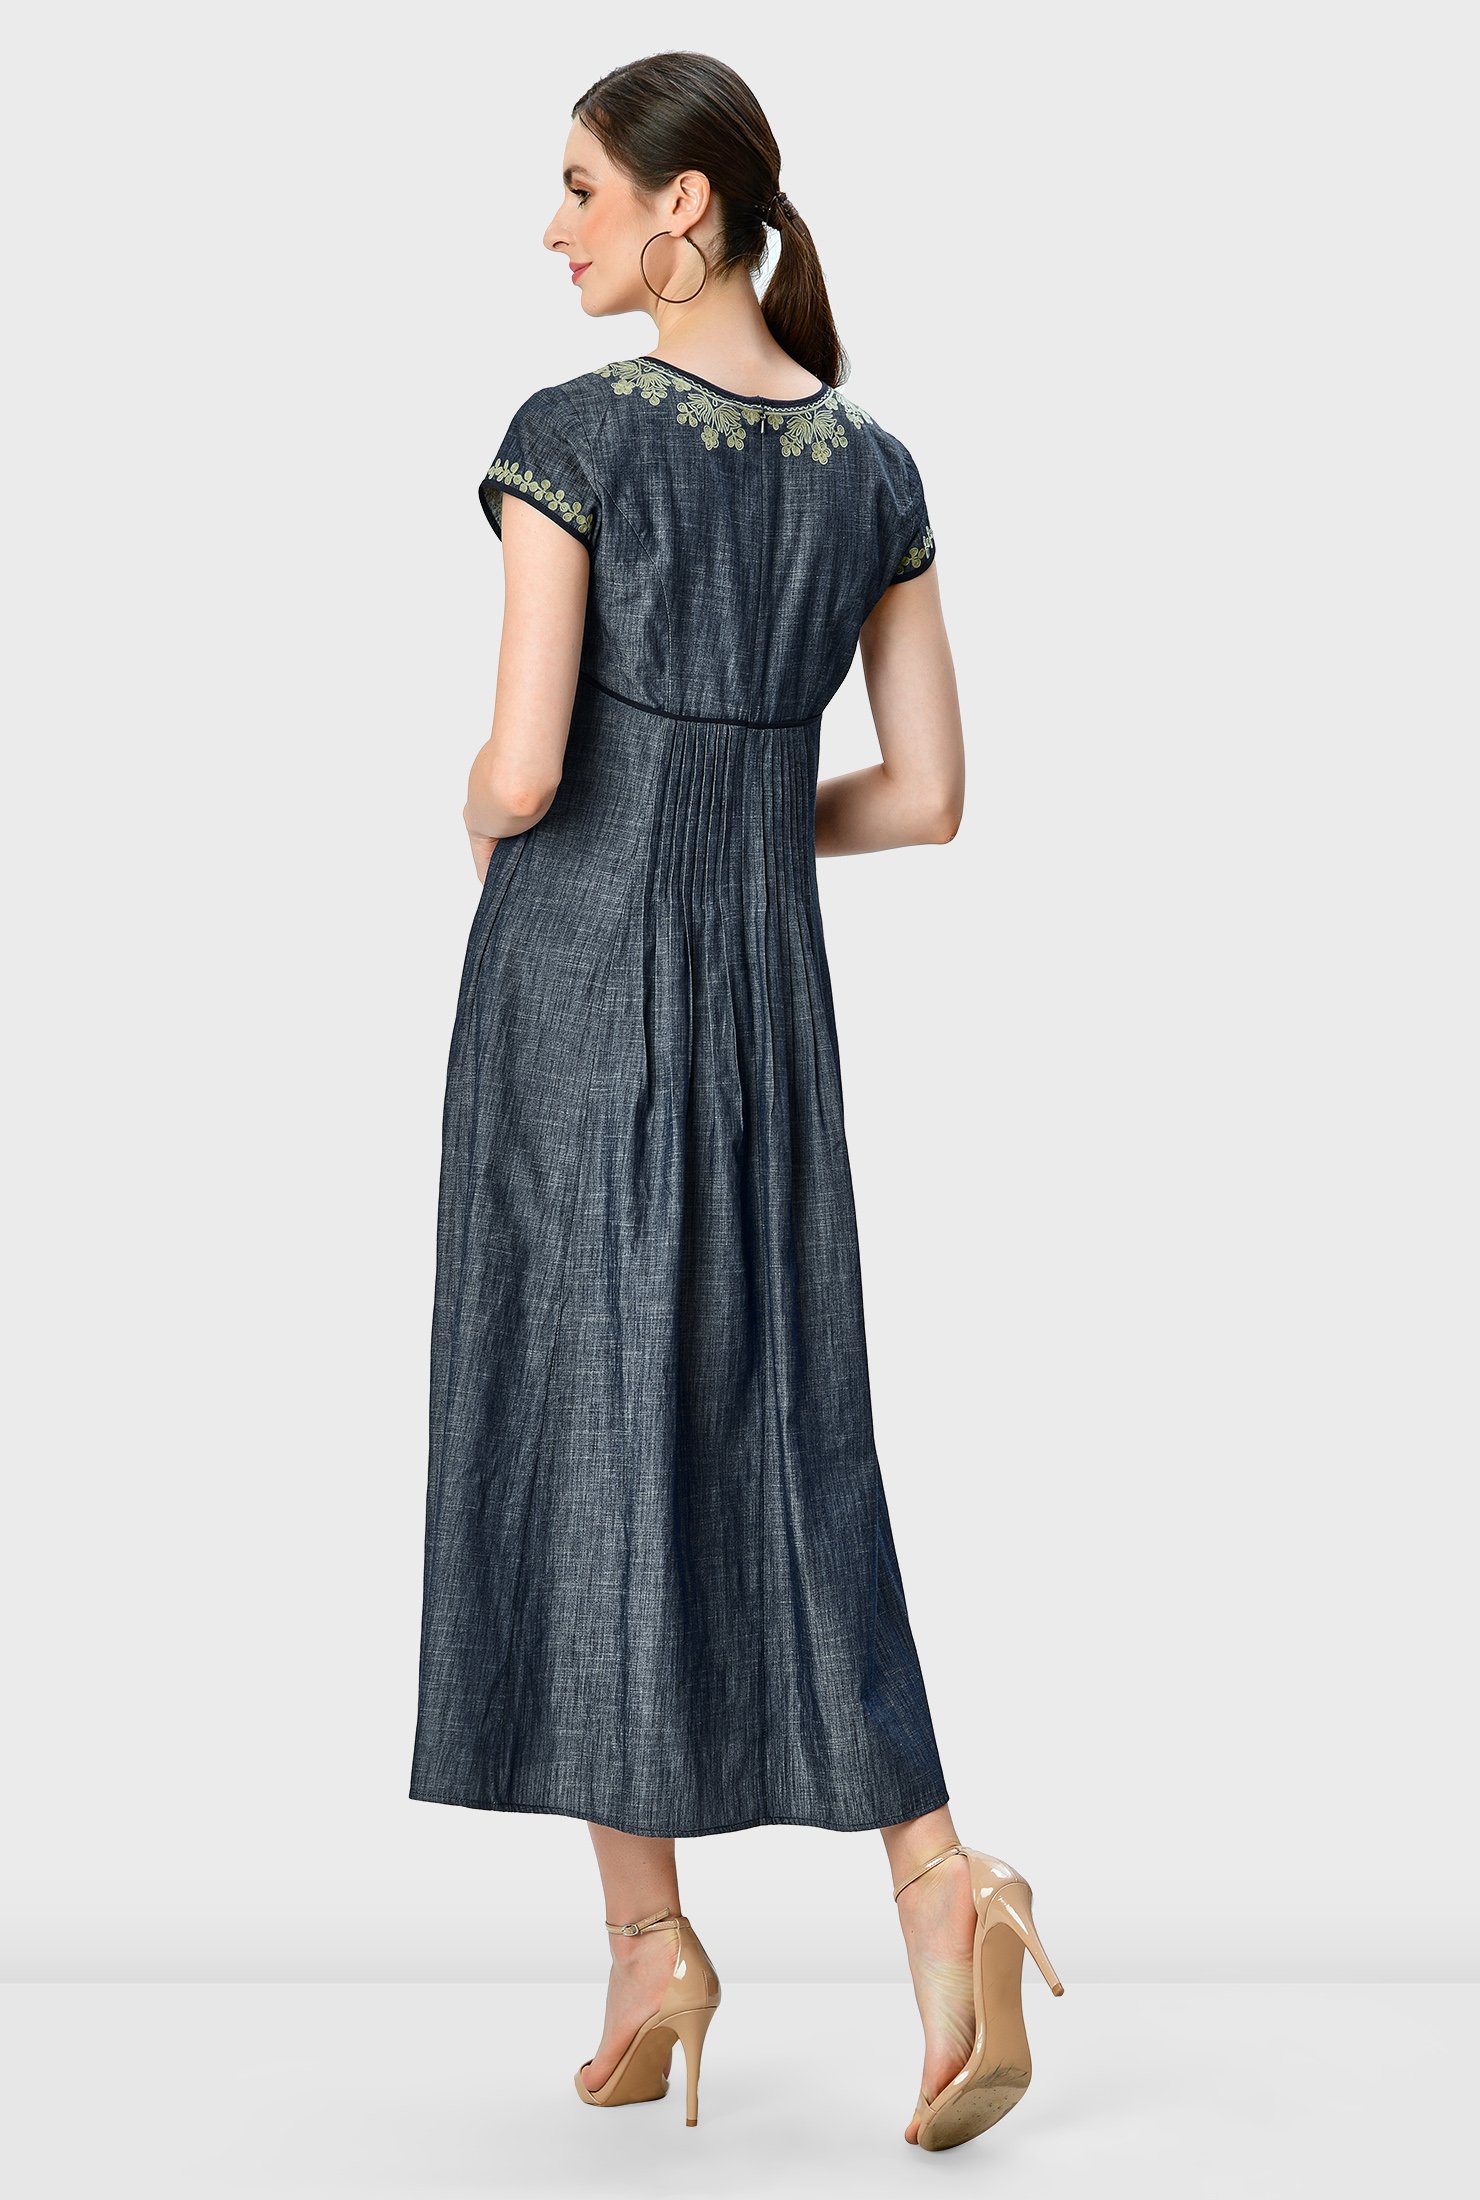 Artful embroidery blooms on our light cotton chambray dress fashioned with front and back pintuck pleats that release from the contrast empire waist to the full flare skirt. 